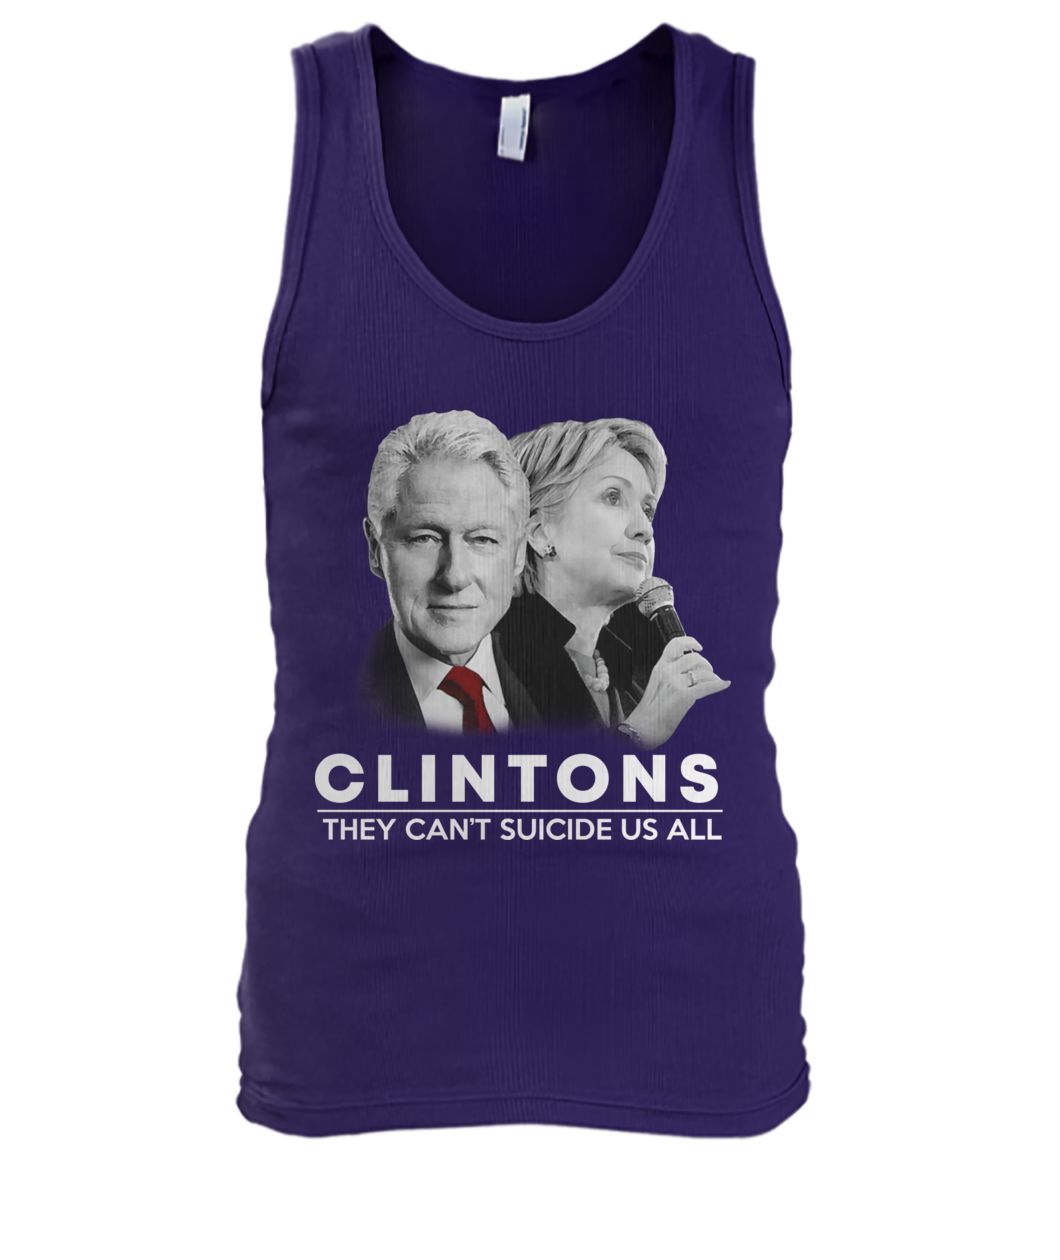 Clinton they can't suicide us all men's tank top